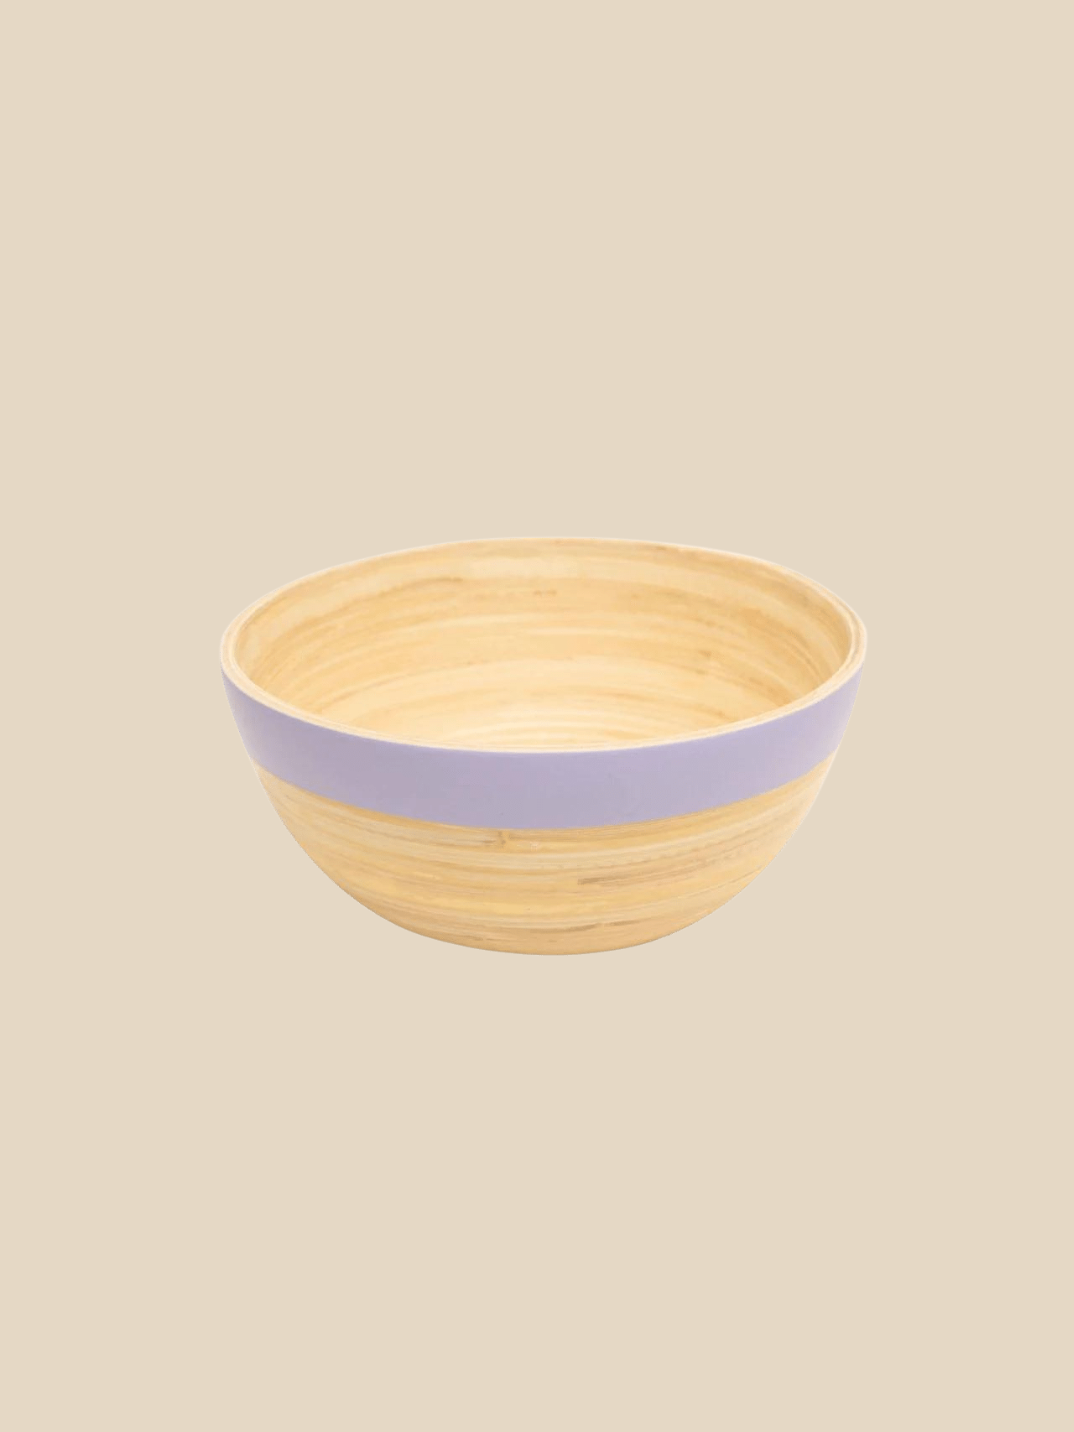 This 100% natural bamboo bowl is perfect to use as a snack bowl or for eating side dishes, small salads or rice out of.